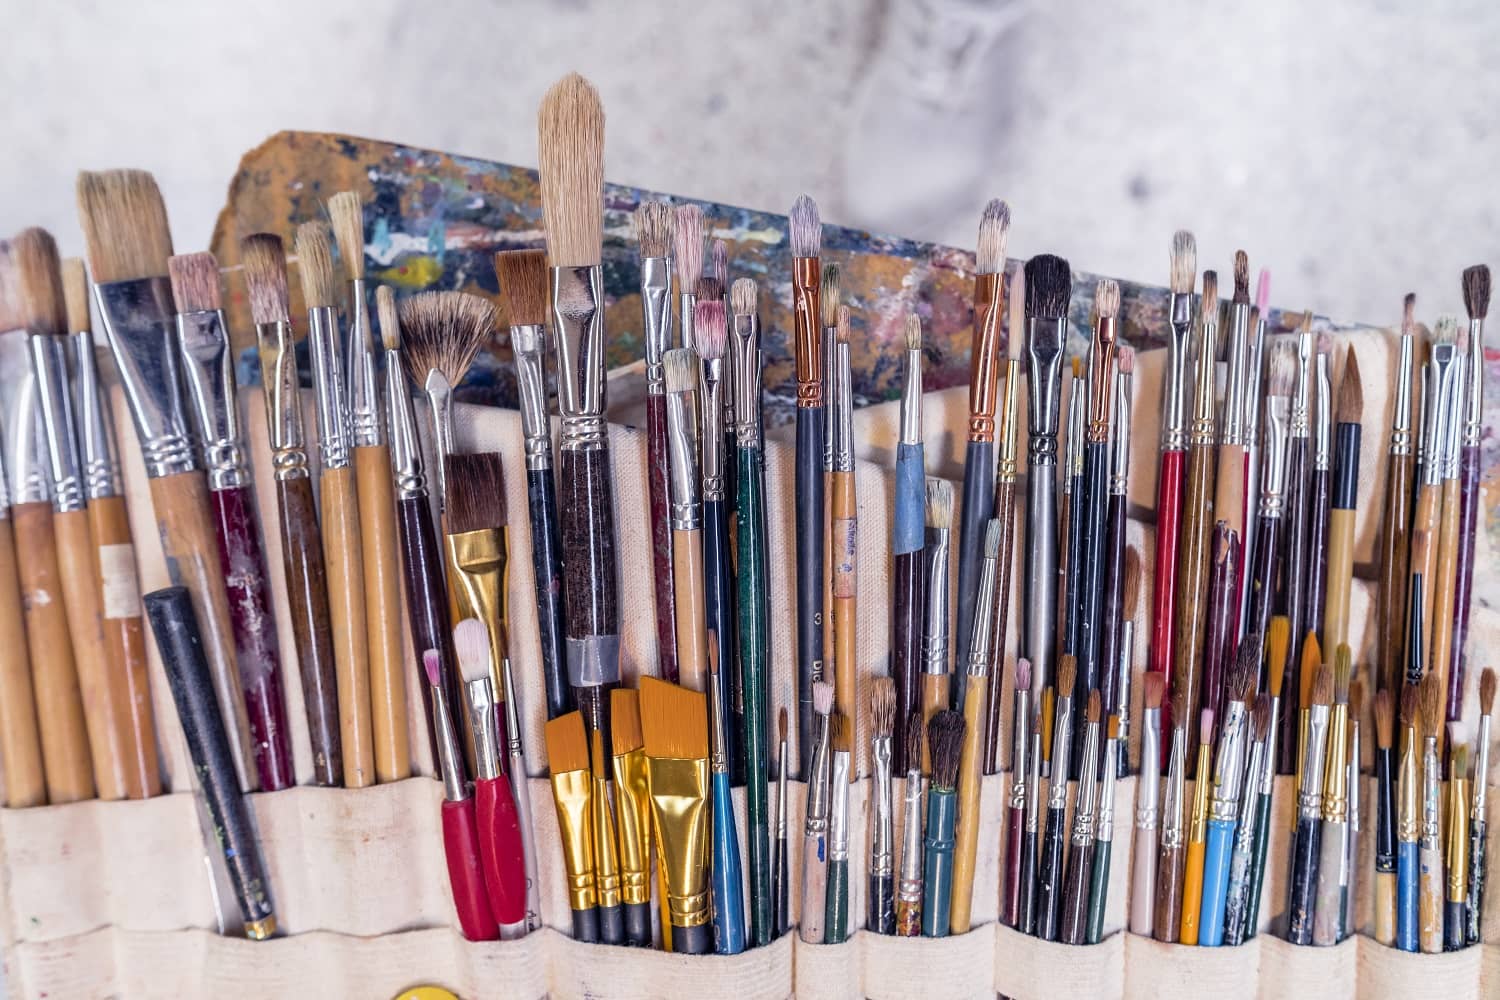 How to take care of your brushes